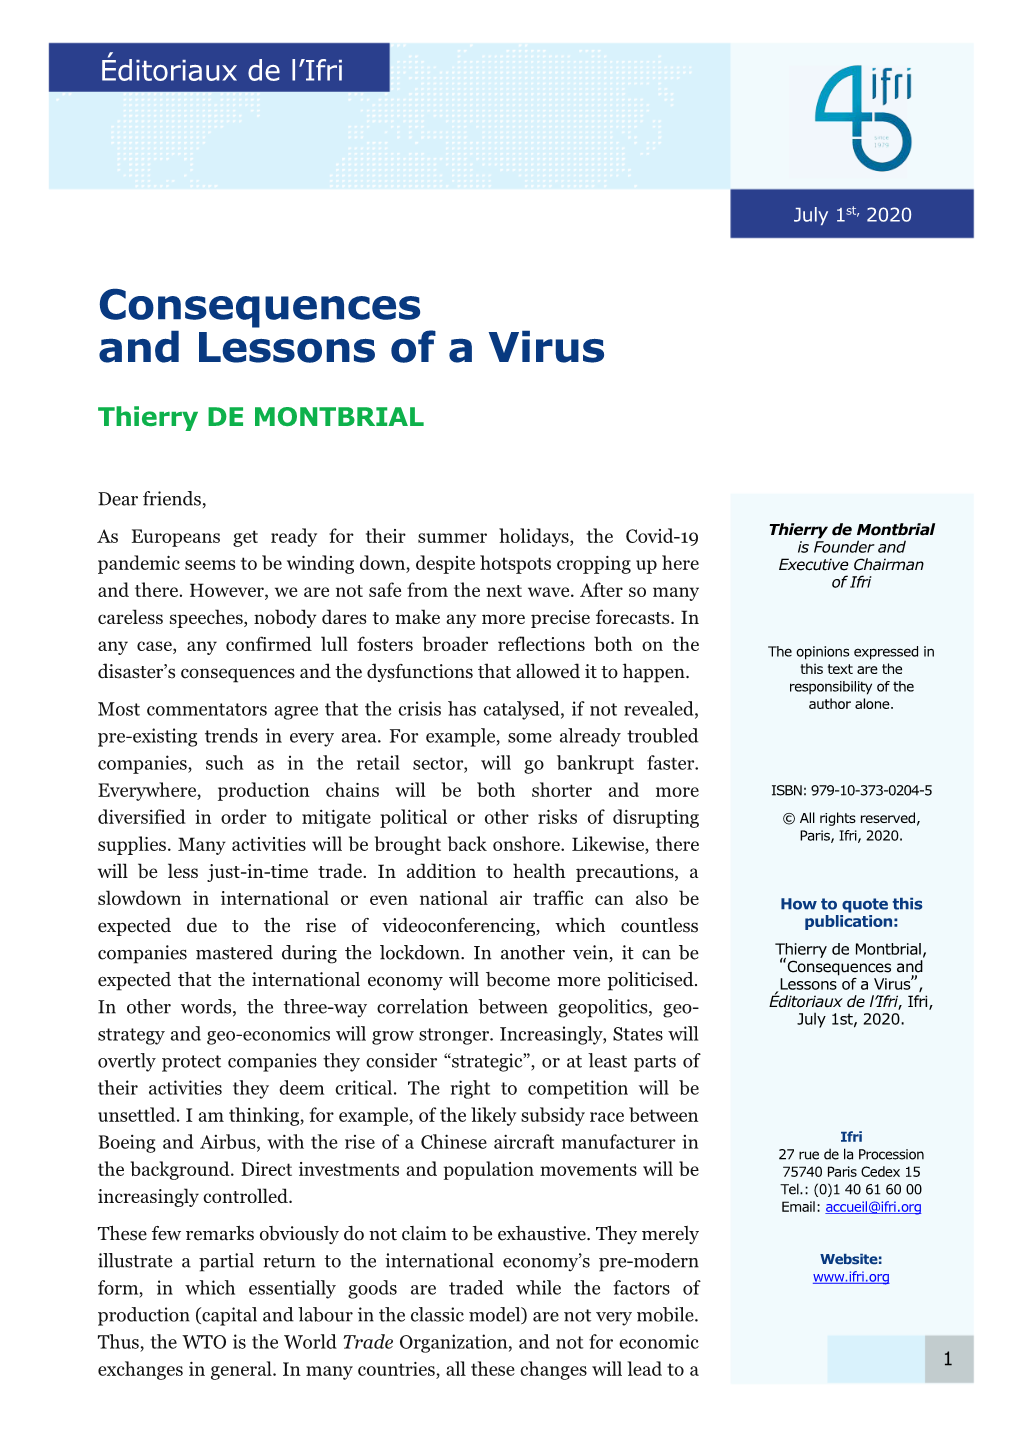 Consequences and Lessons of a Virus